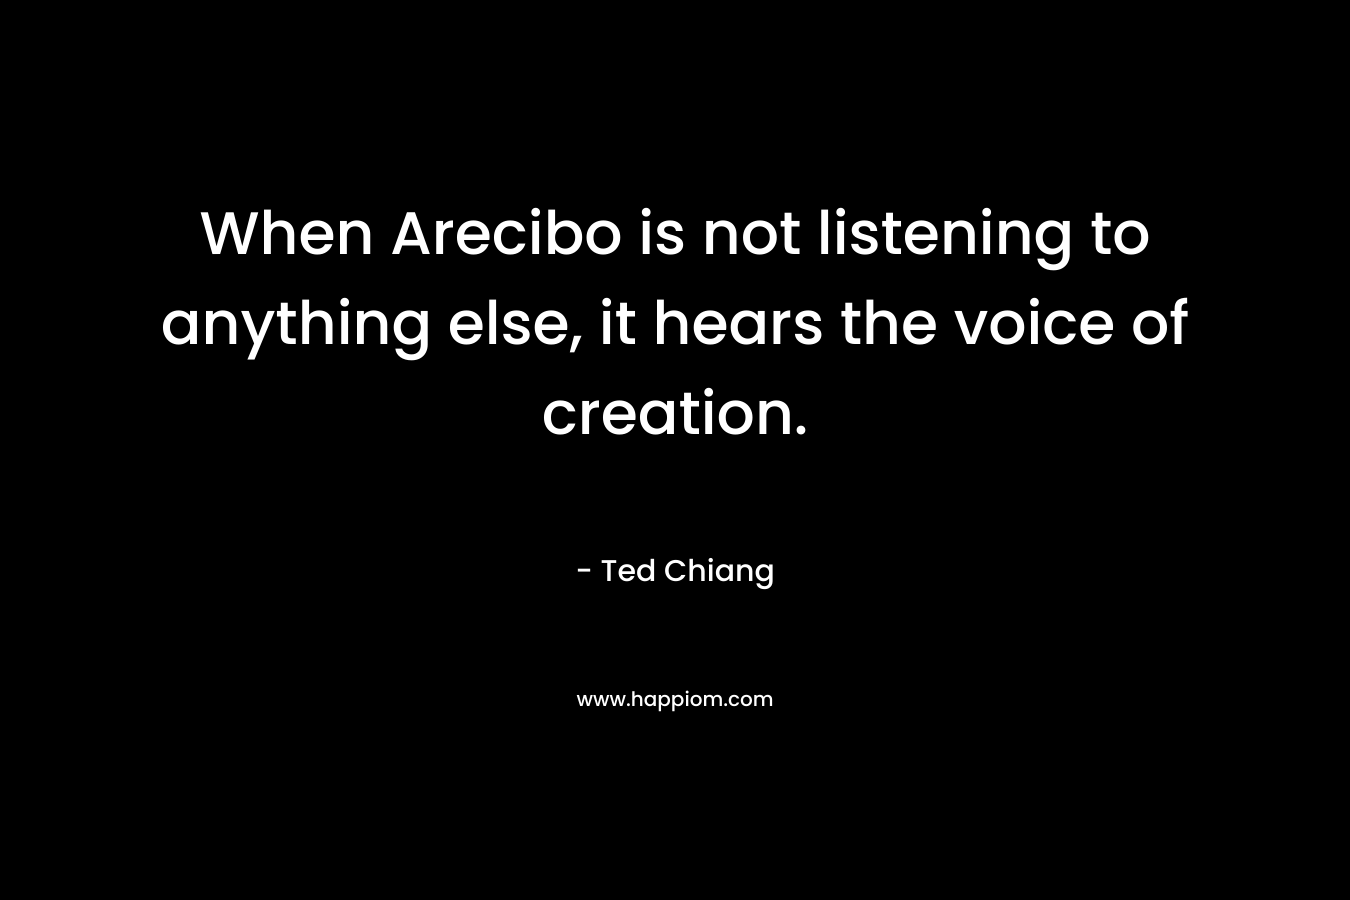 When Arecibo is not listening to anything else, it hears the voice of creation.